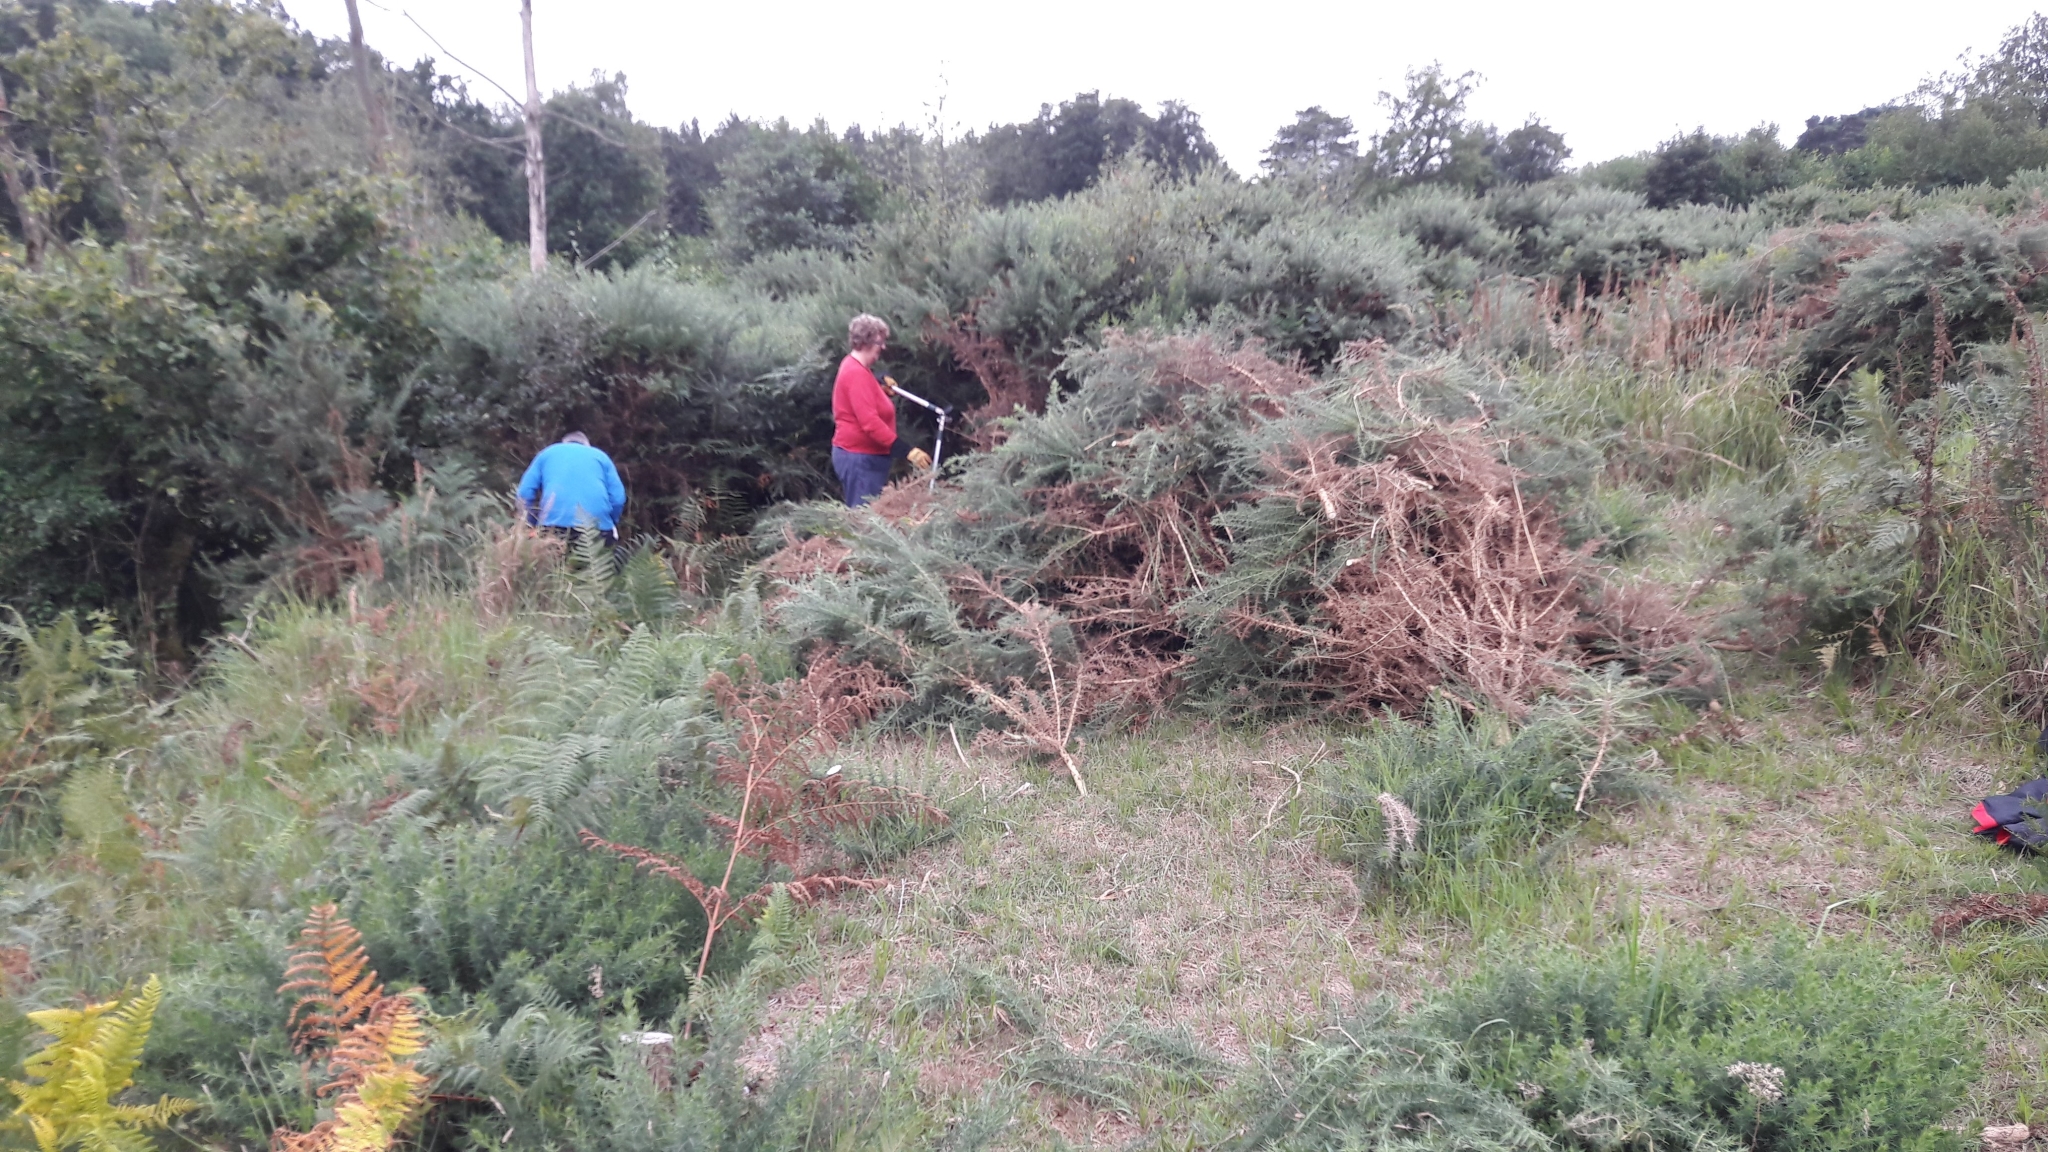 A photo from the FoTF Conservation Event - August 2018 - Gorse Removal at Hockham Hills & Holes : Volunteers at work amongst the Gorse